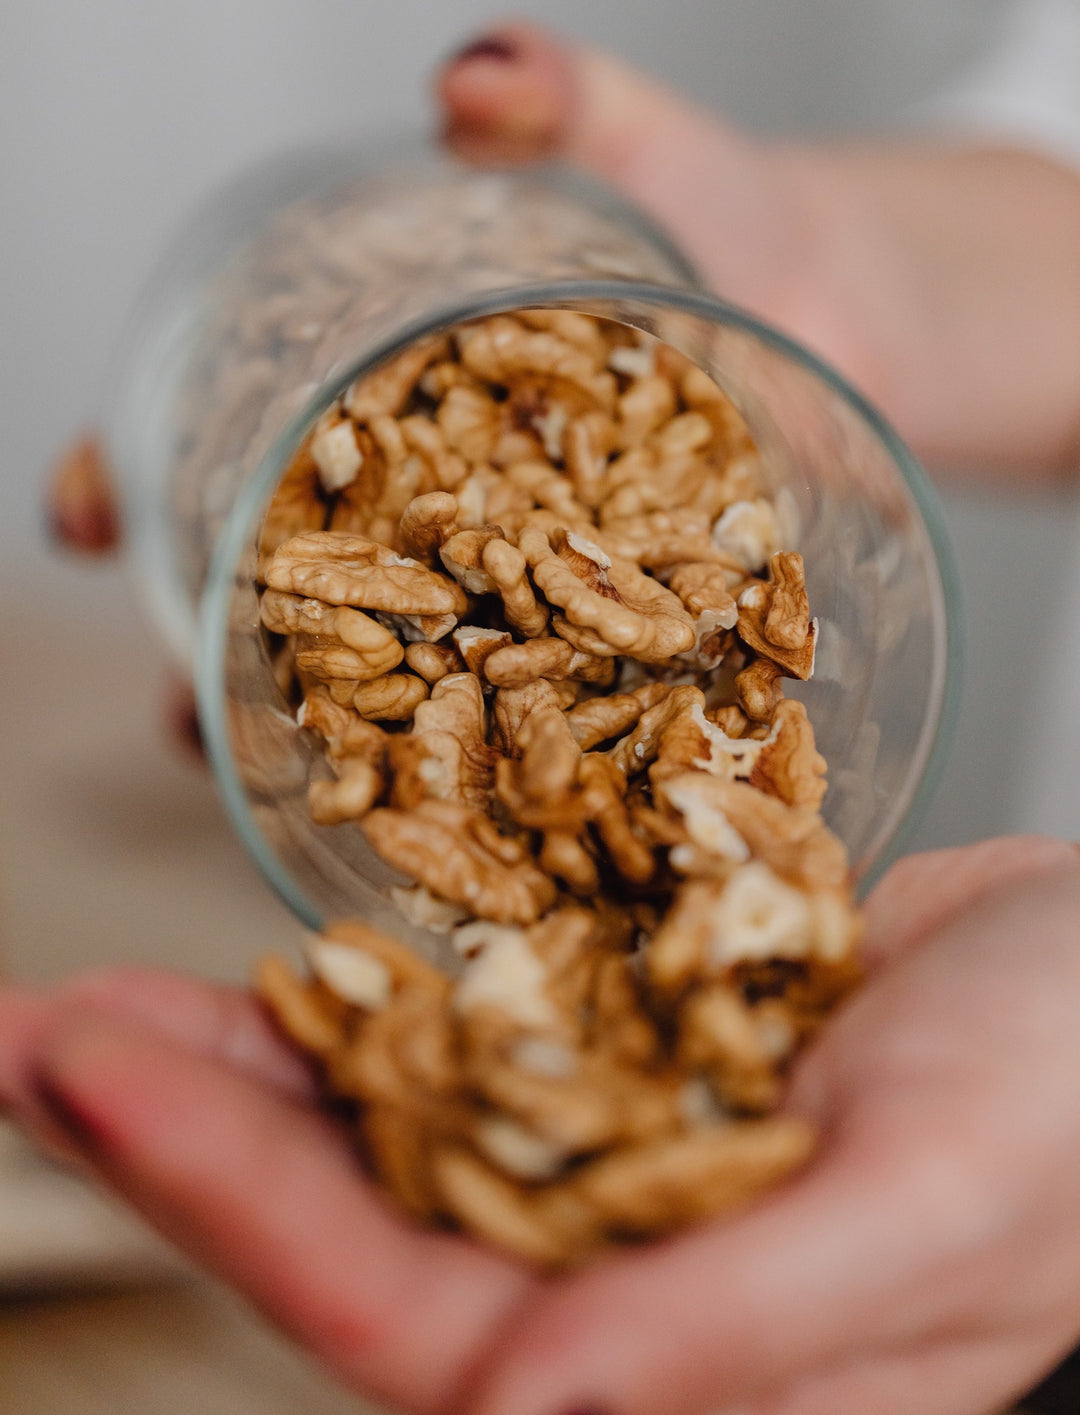 Five Reasons to Make Walnuts Your Go-To Snack